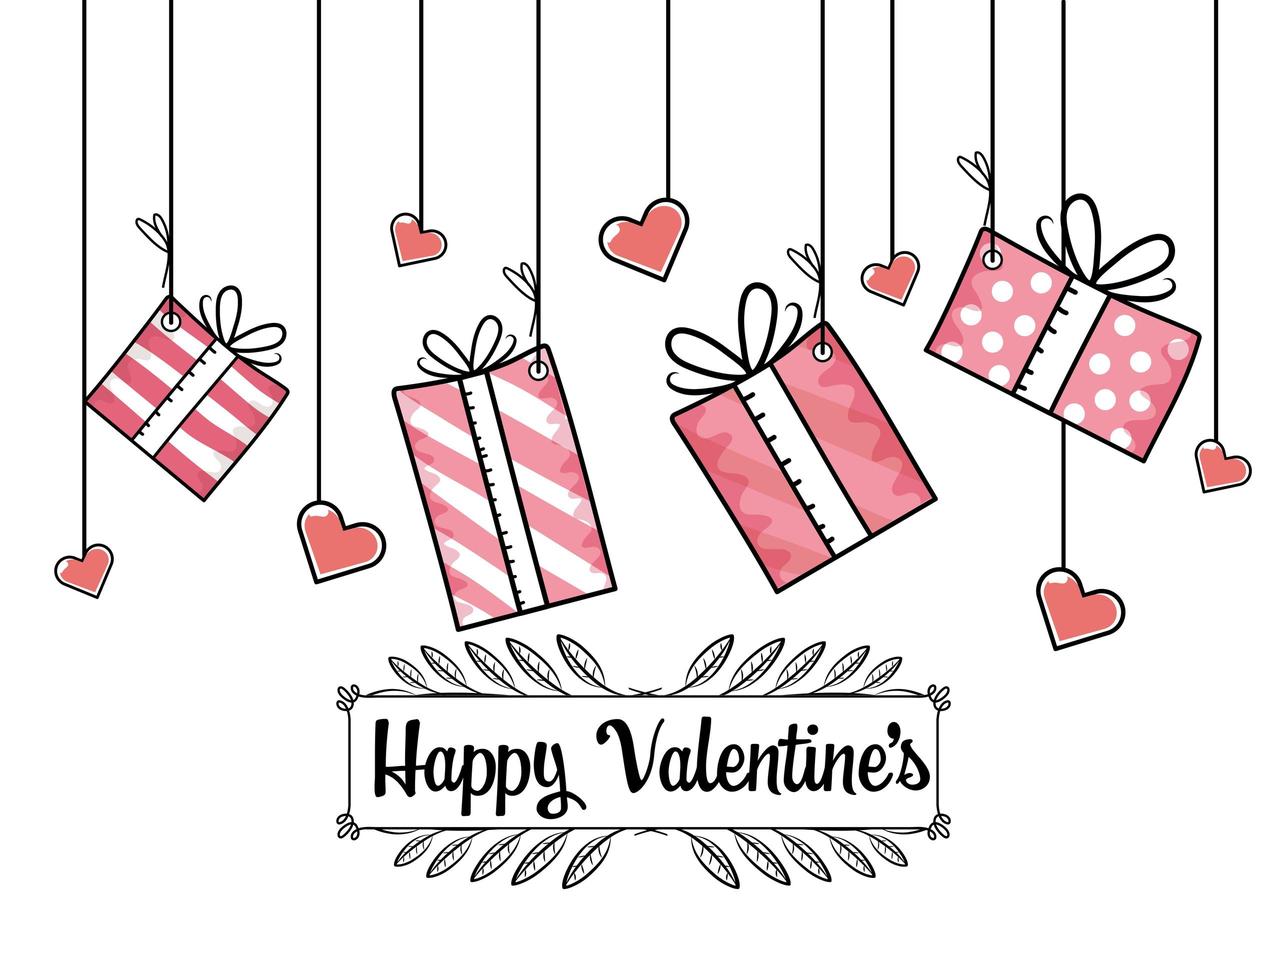 Valentines day gifts with hearts design vector